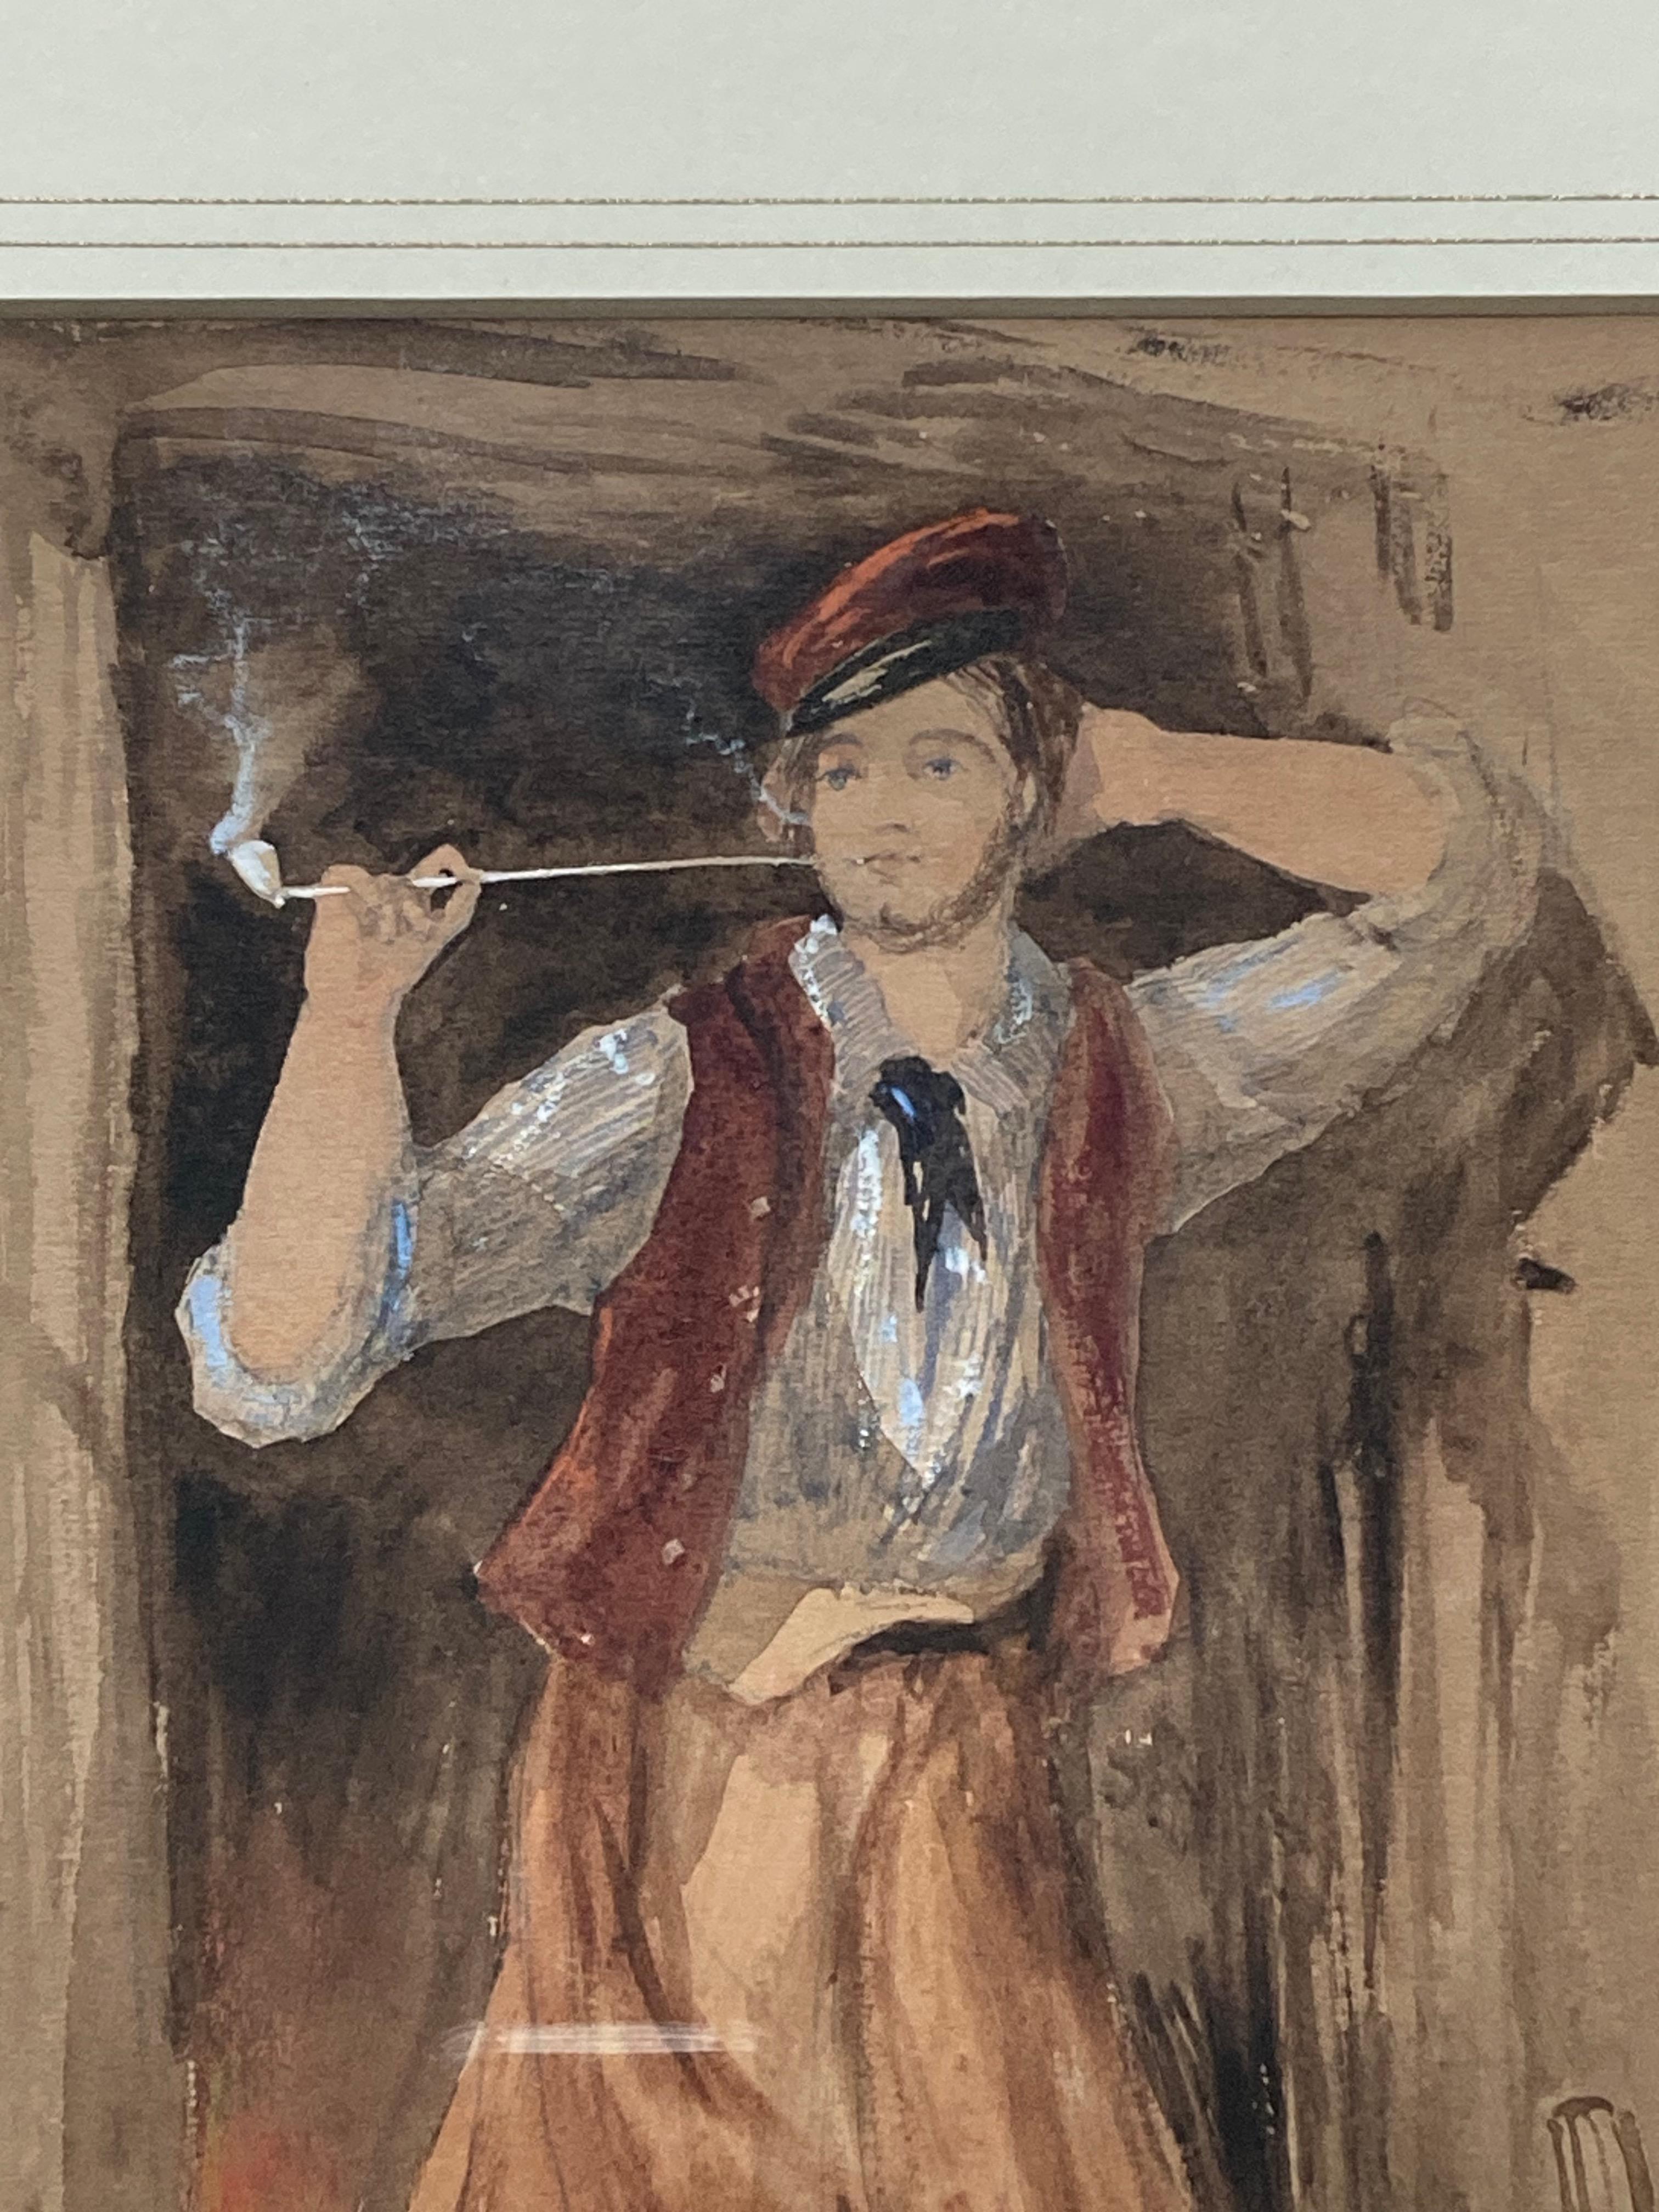 A really charming study of a blacksmith puffing on a clay pipe at the forge door.

Thomas Charles Leeson Rowbotham Junr (1823-1875)
Village Blacksmith Patterdale, Aug 1848
Signed, inscribed and dated
Watercolour
12¼ x 8½inches unframed
20 x 16